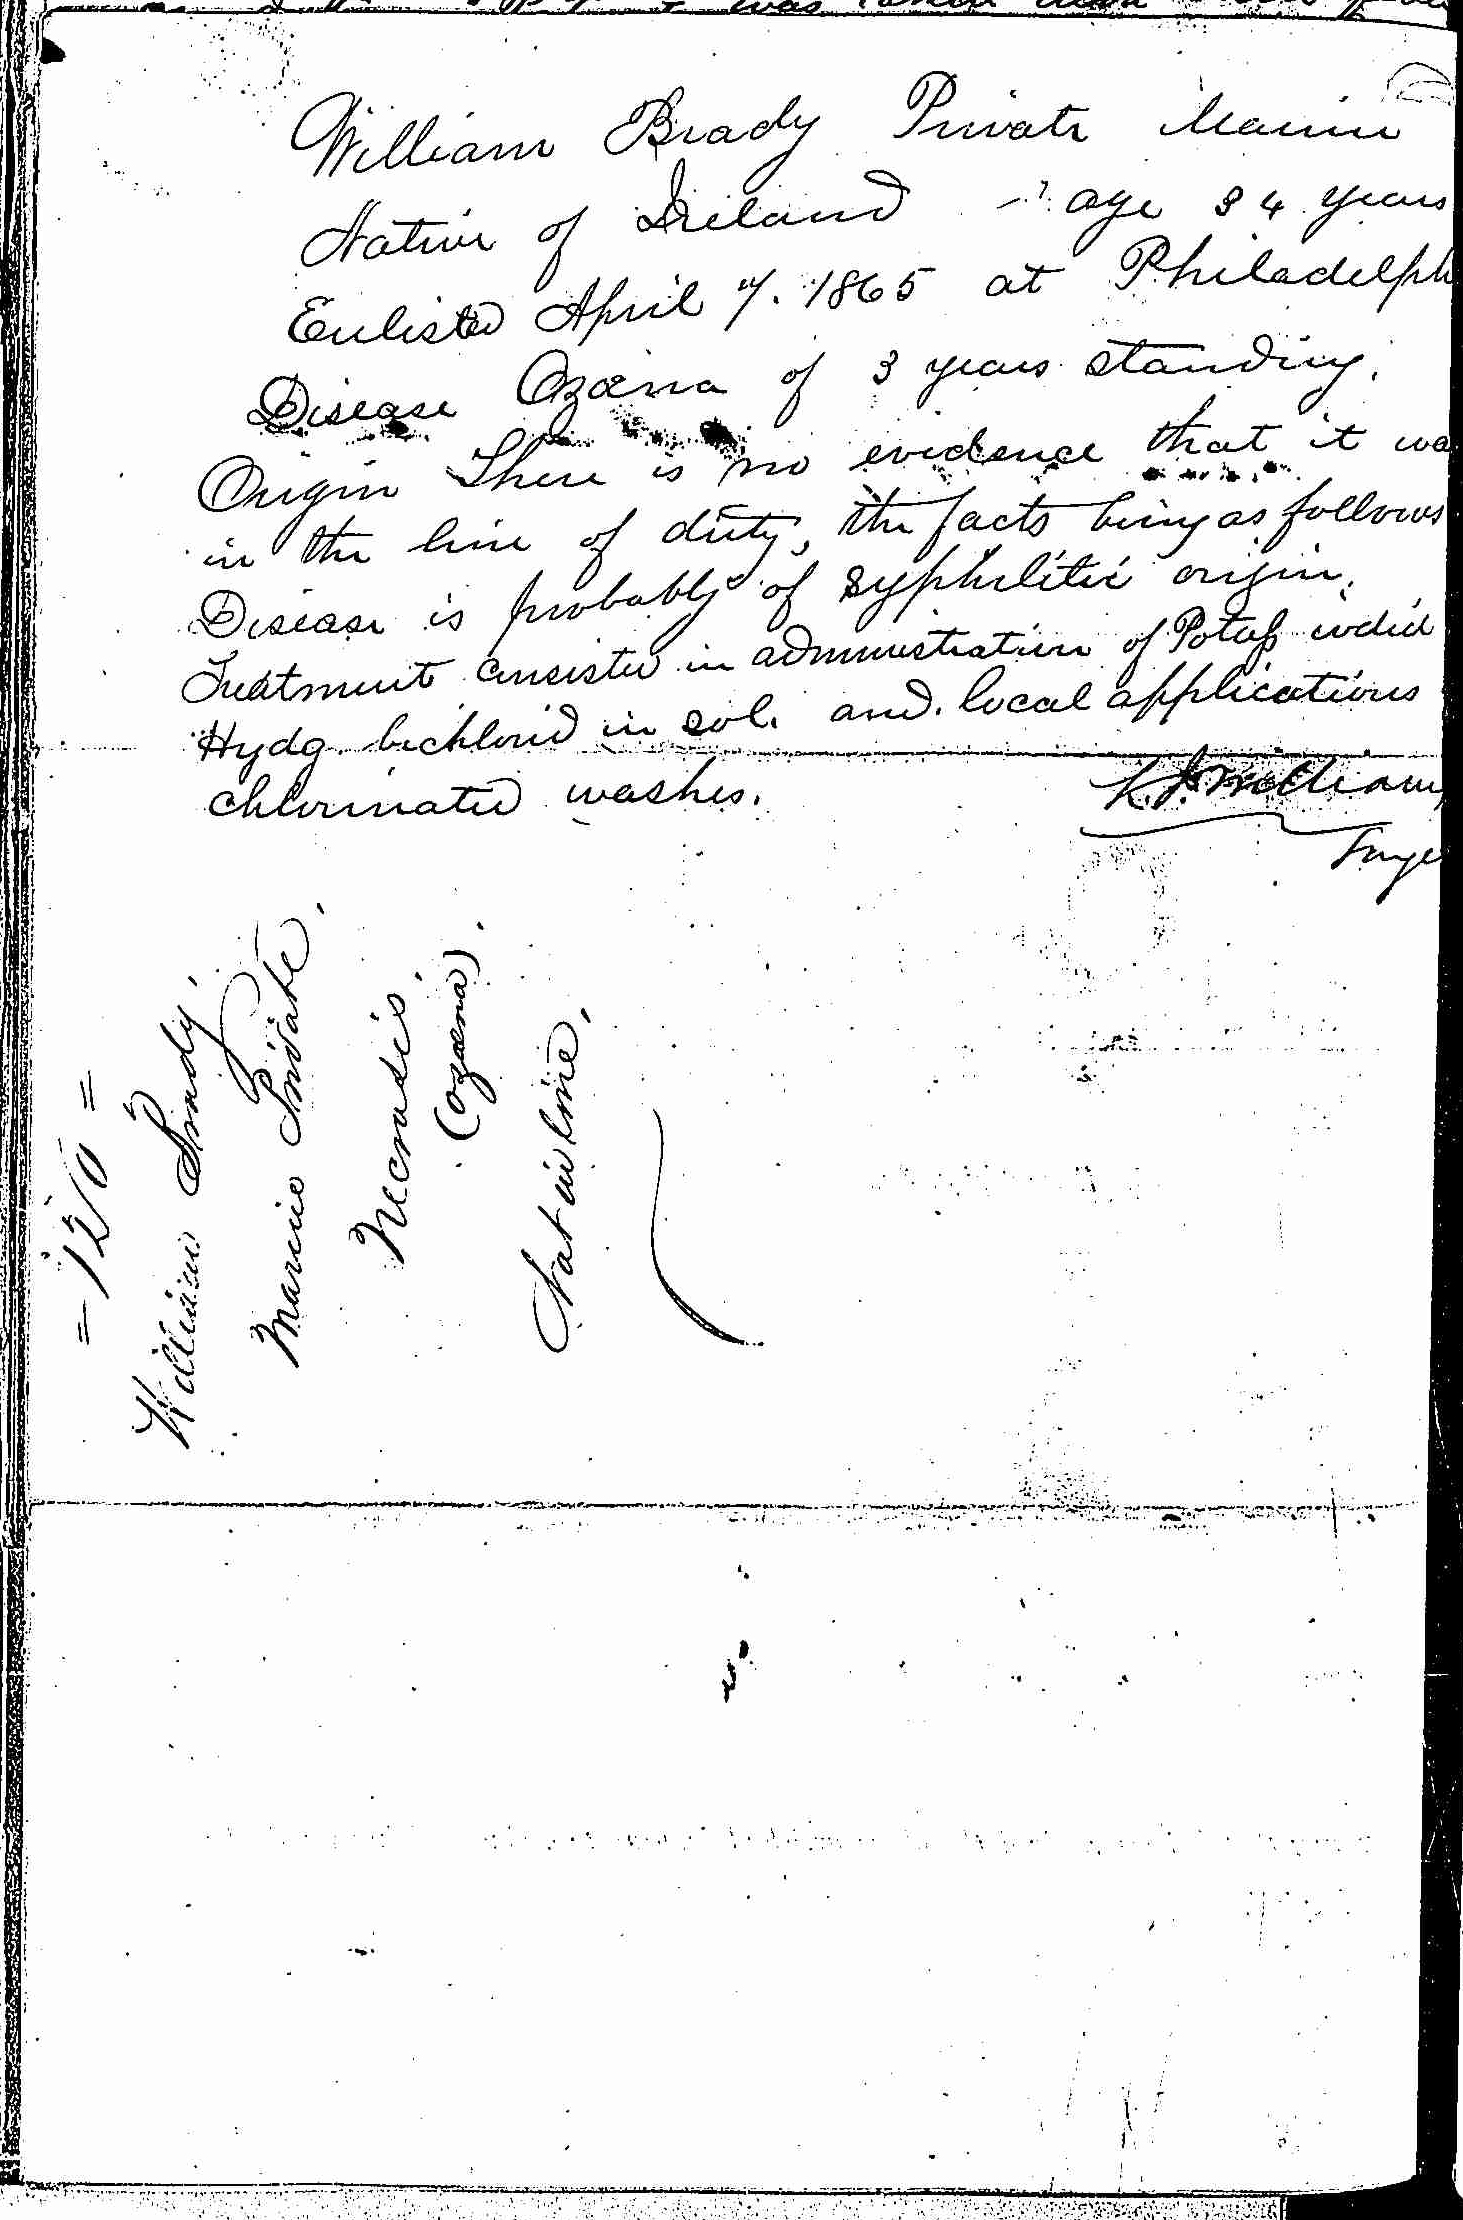 Entry for William Brady (page 2 of 2) in the log Hospital Tickets and Case Papers - Naval Hospital - Washington, D.C. - 1866-68